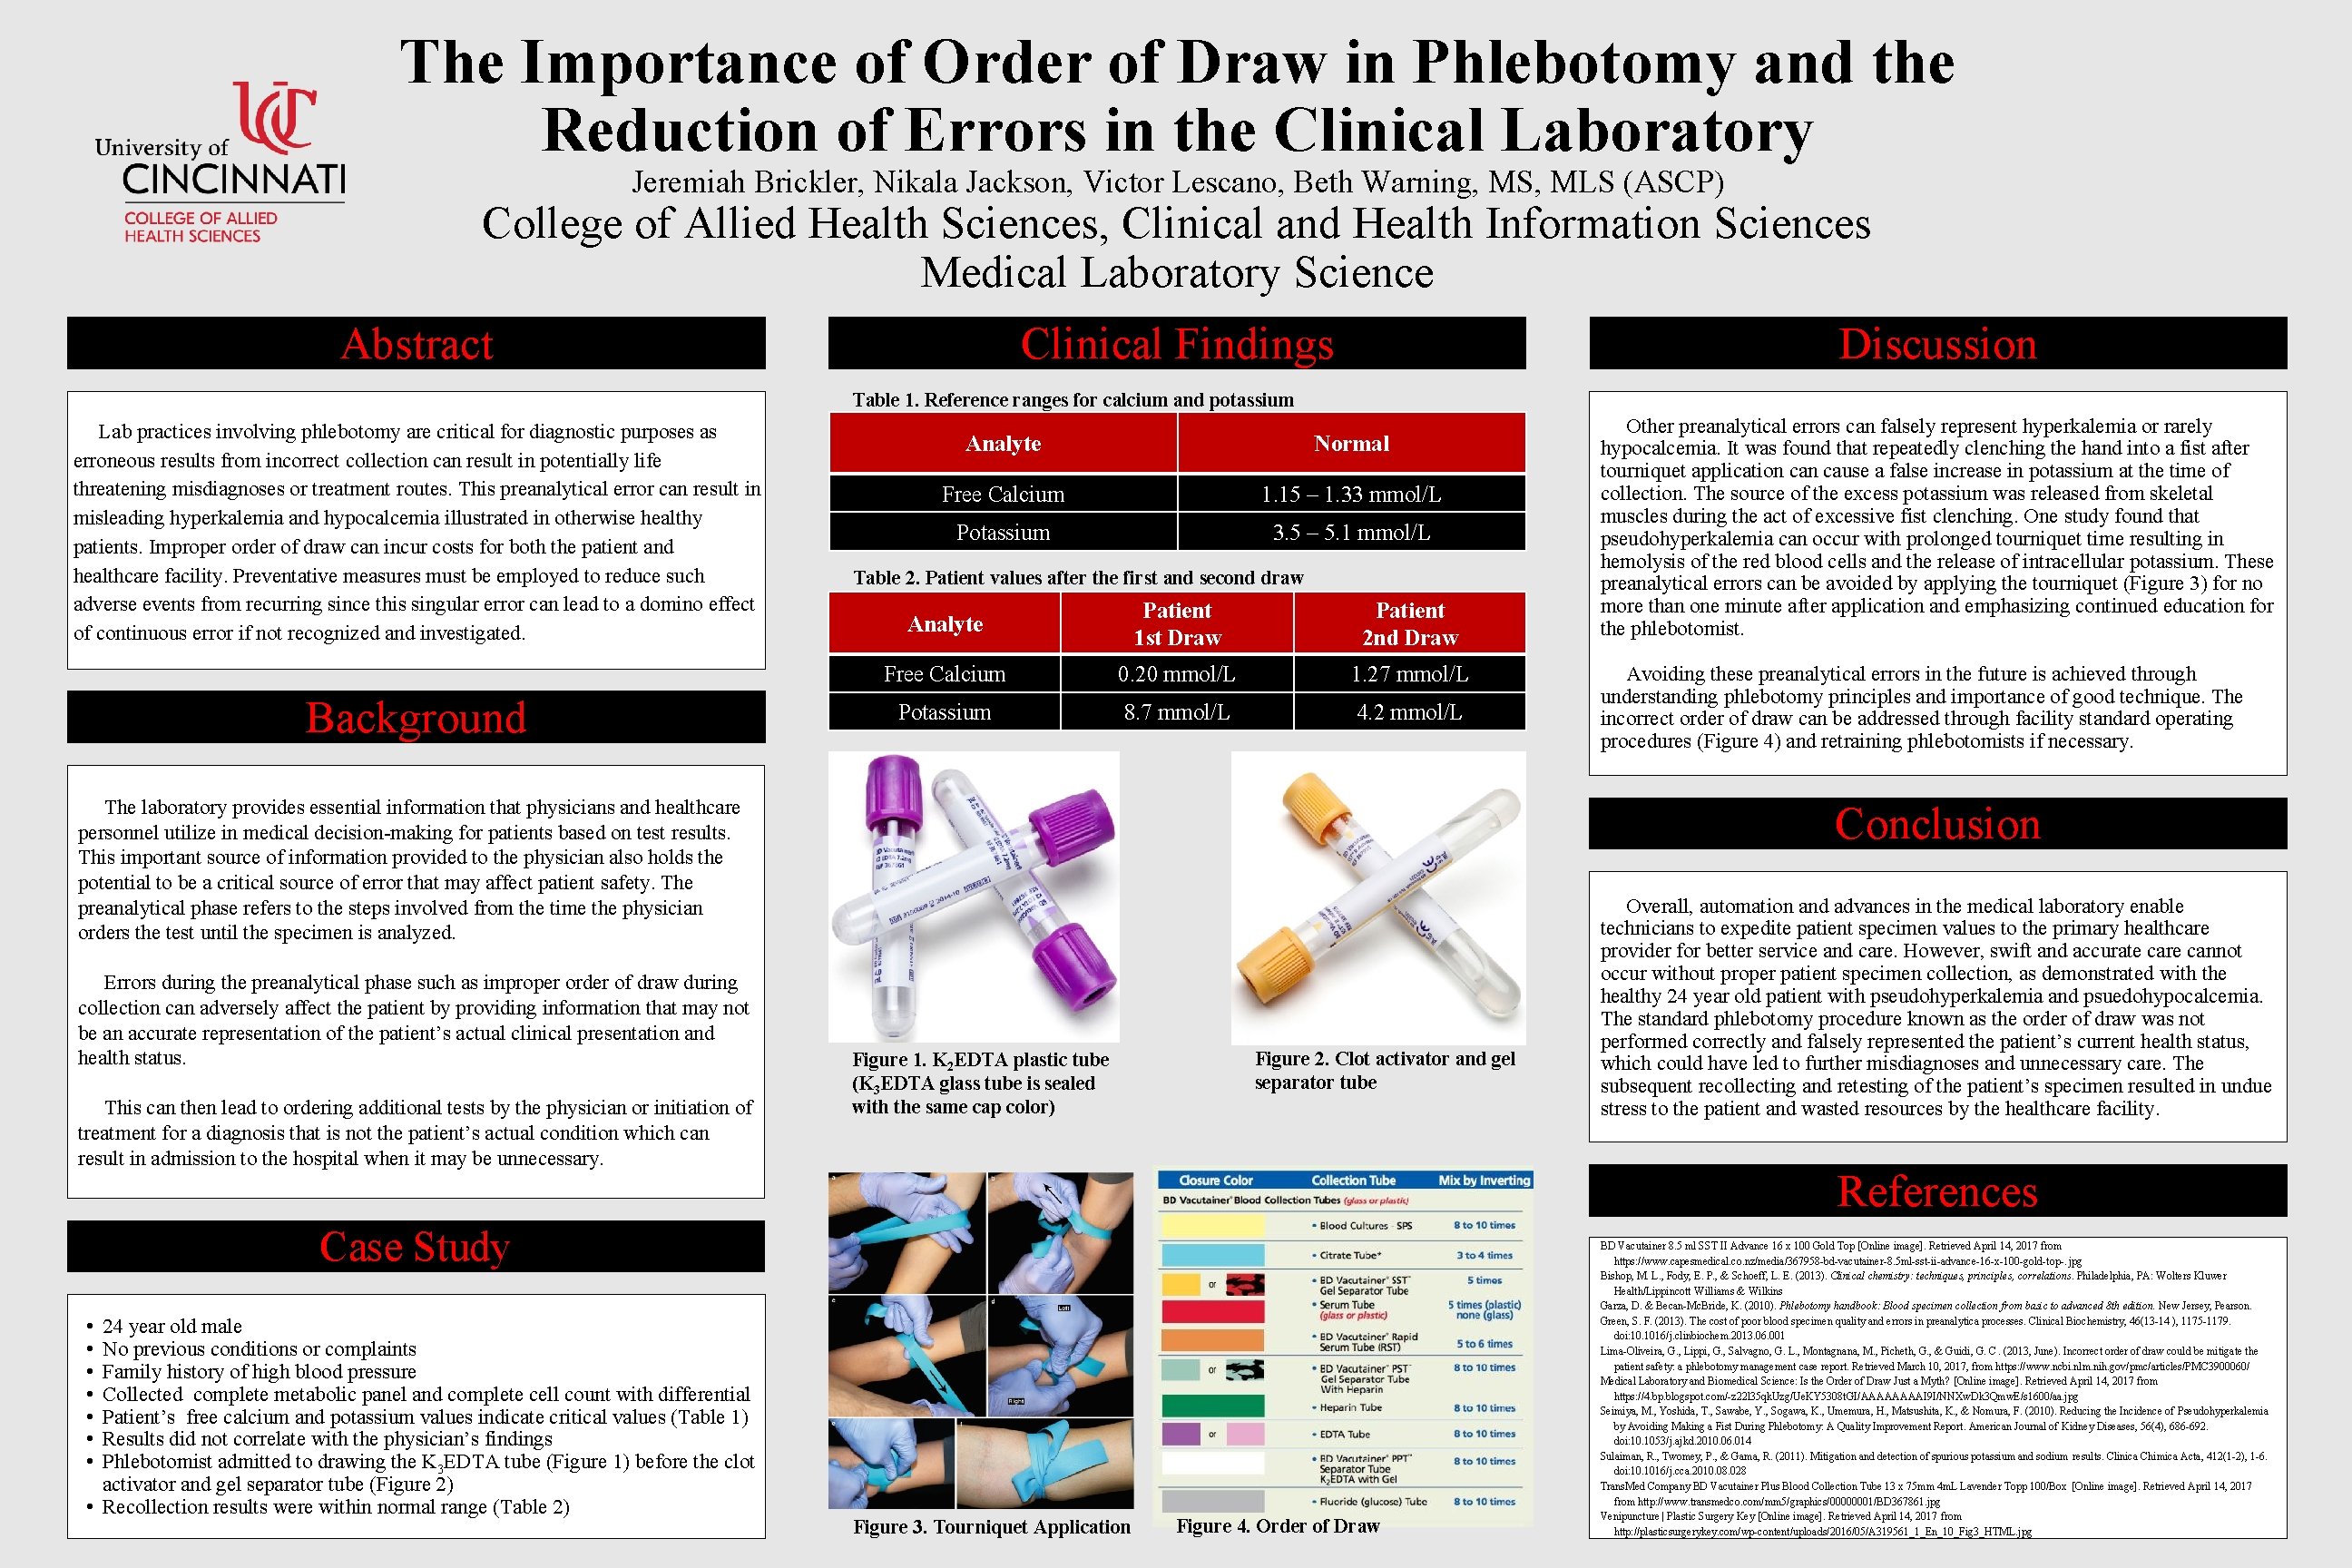 The Importance of Order of Draw in Phlebotomy and the Reduction of Errors in